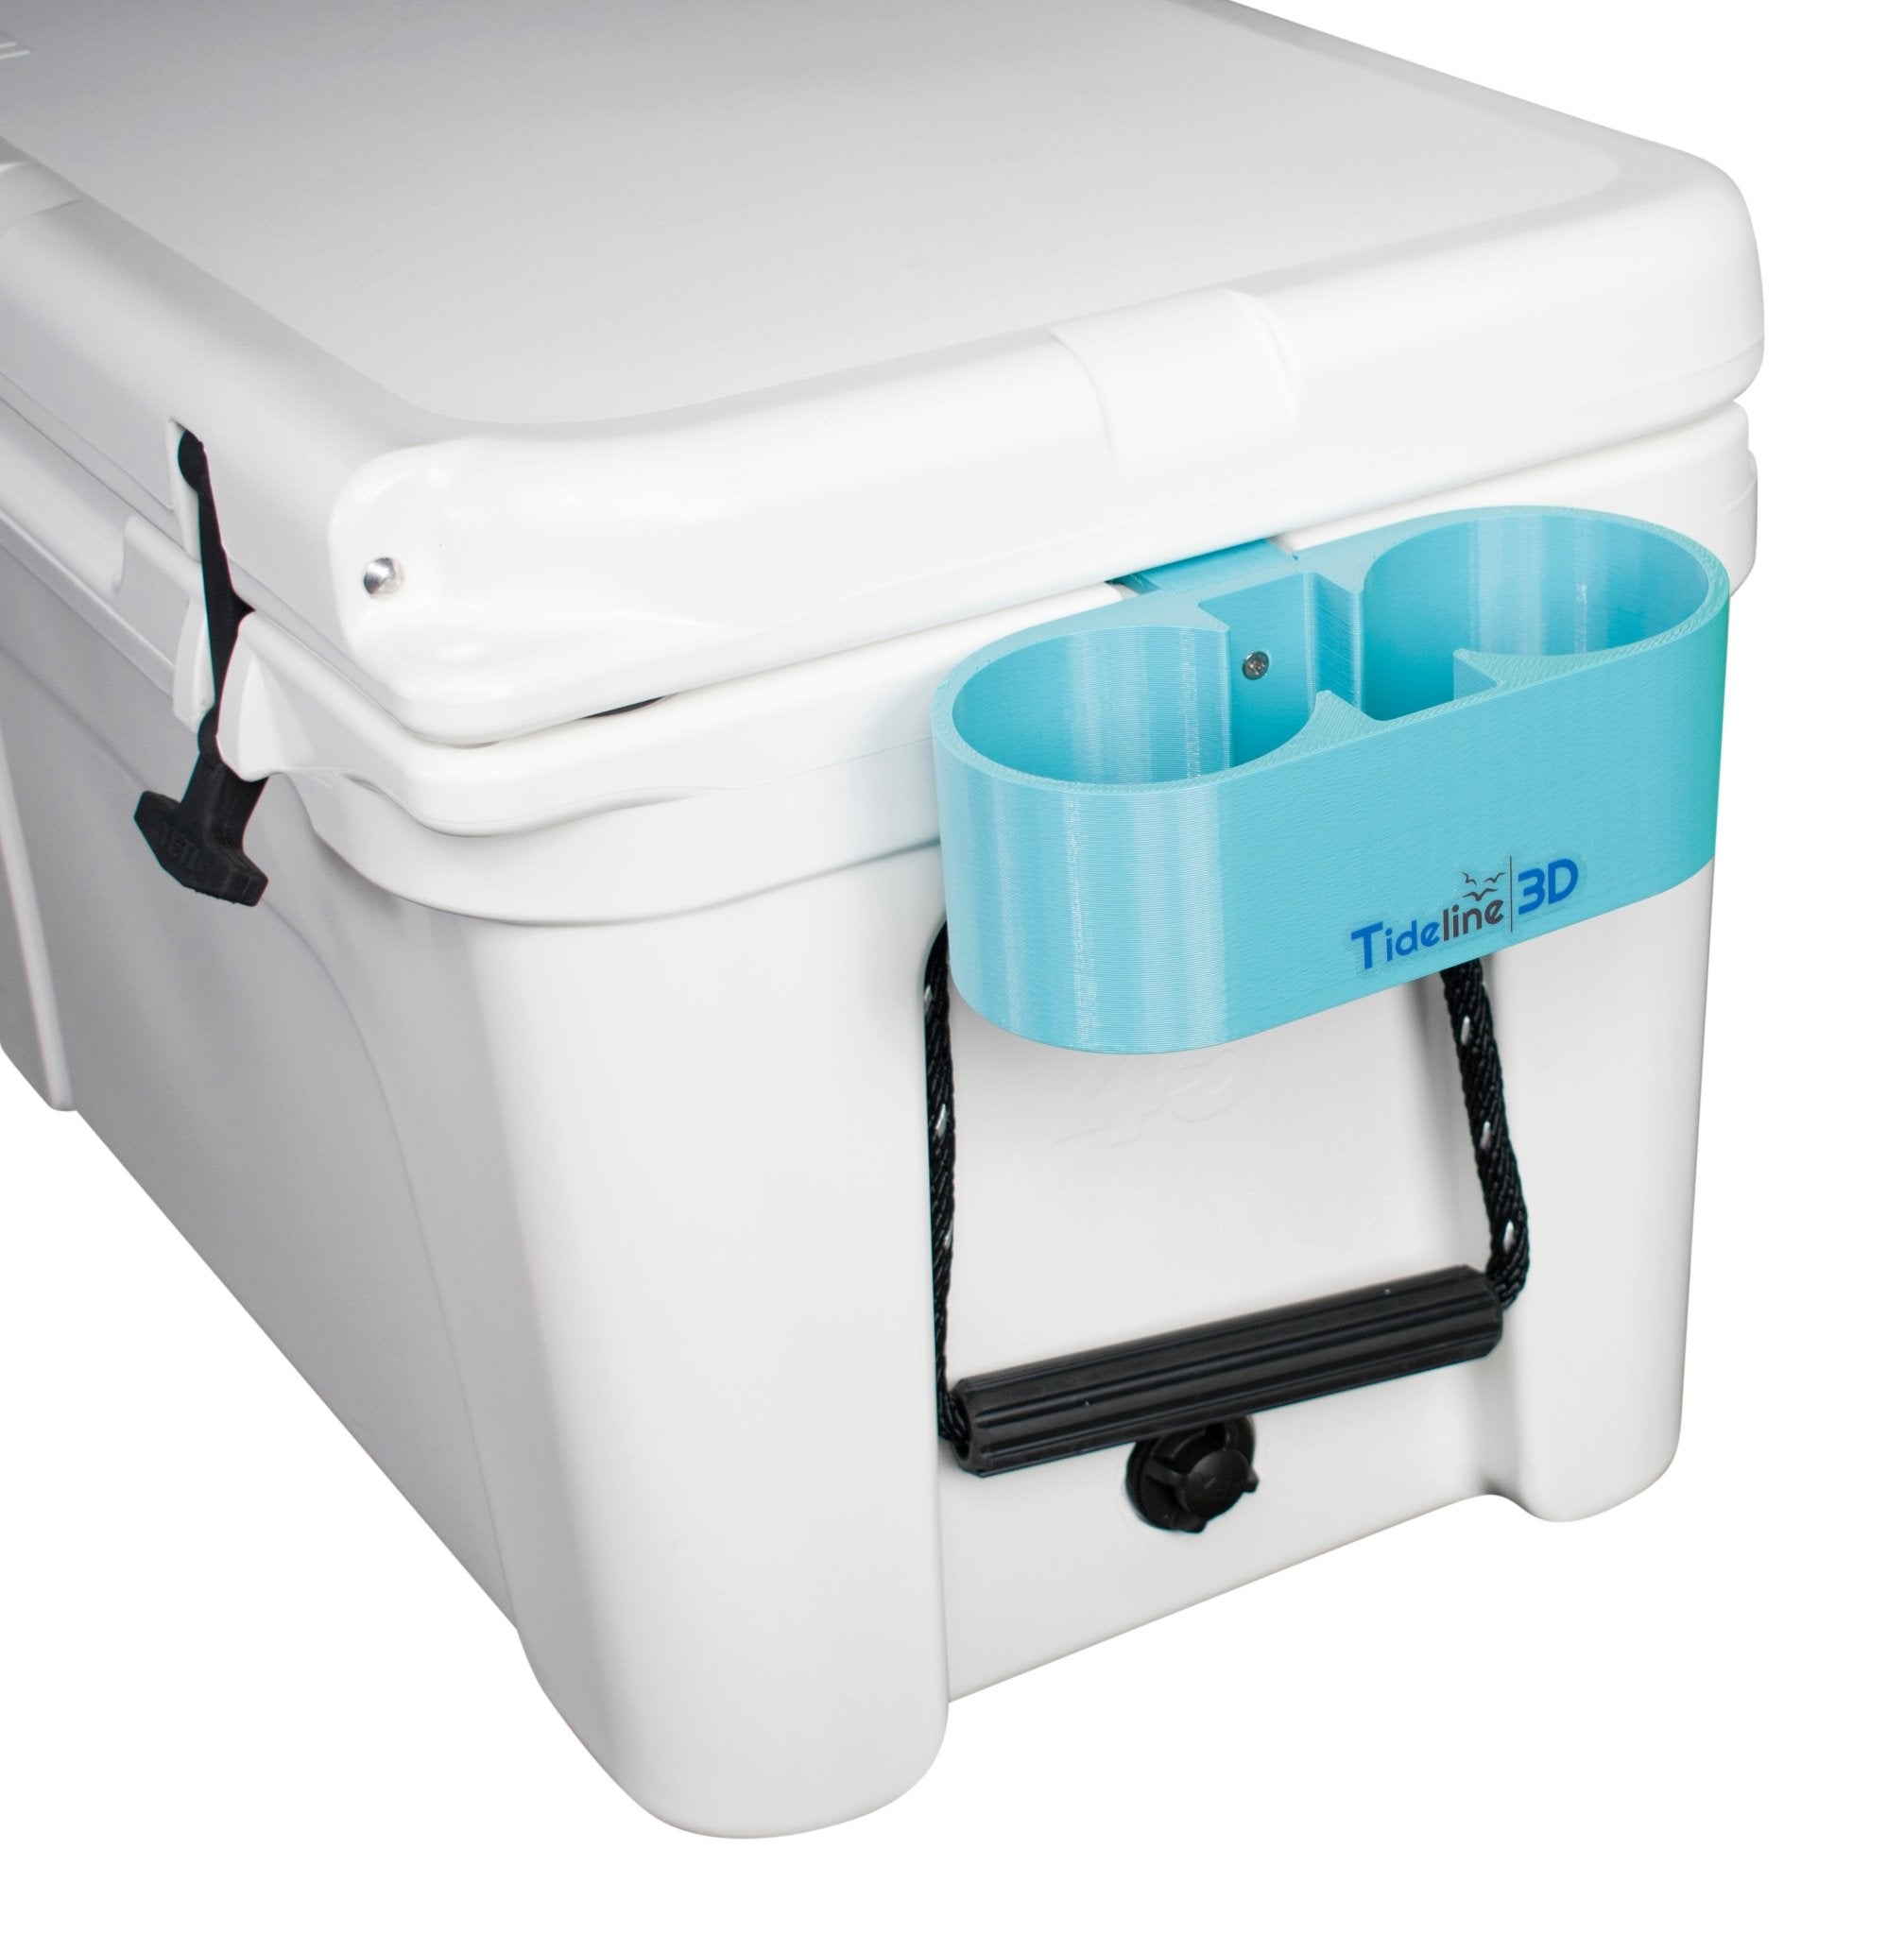 SHOP ALL - Yeti Coolers